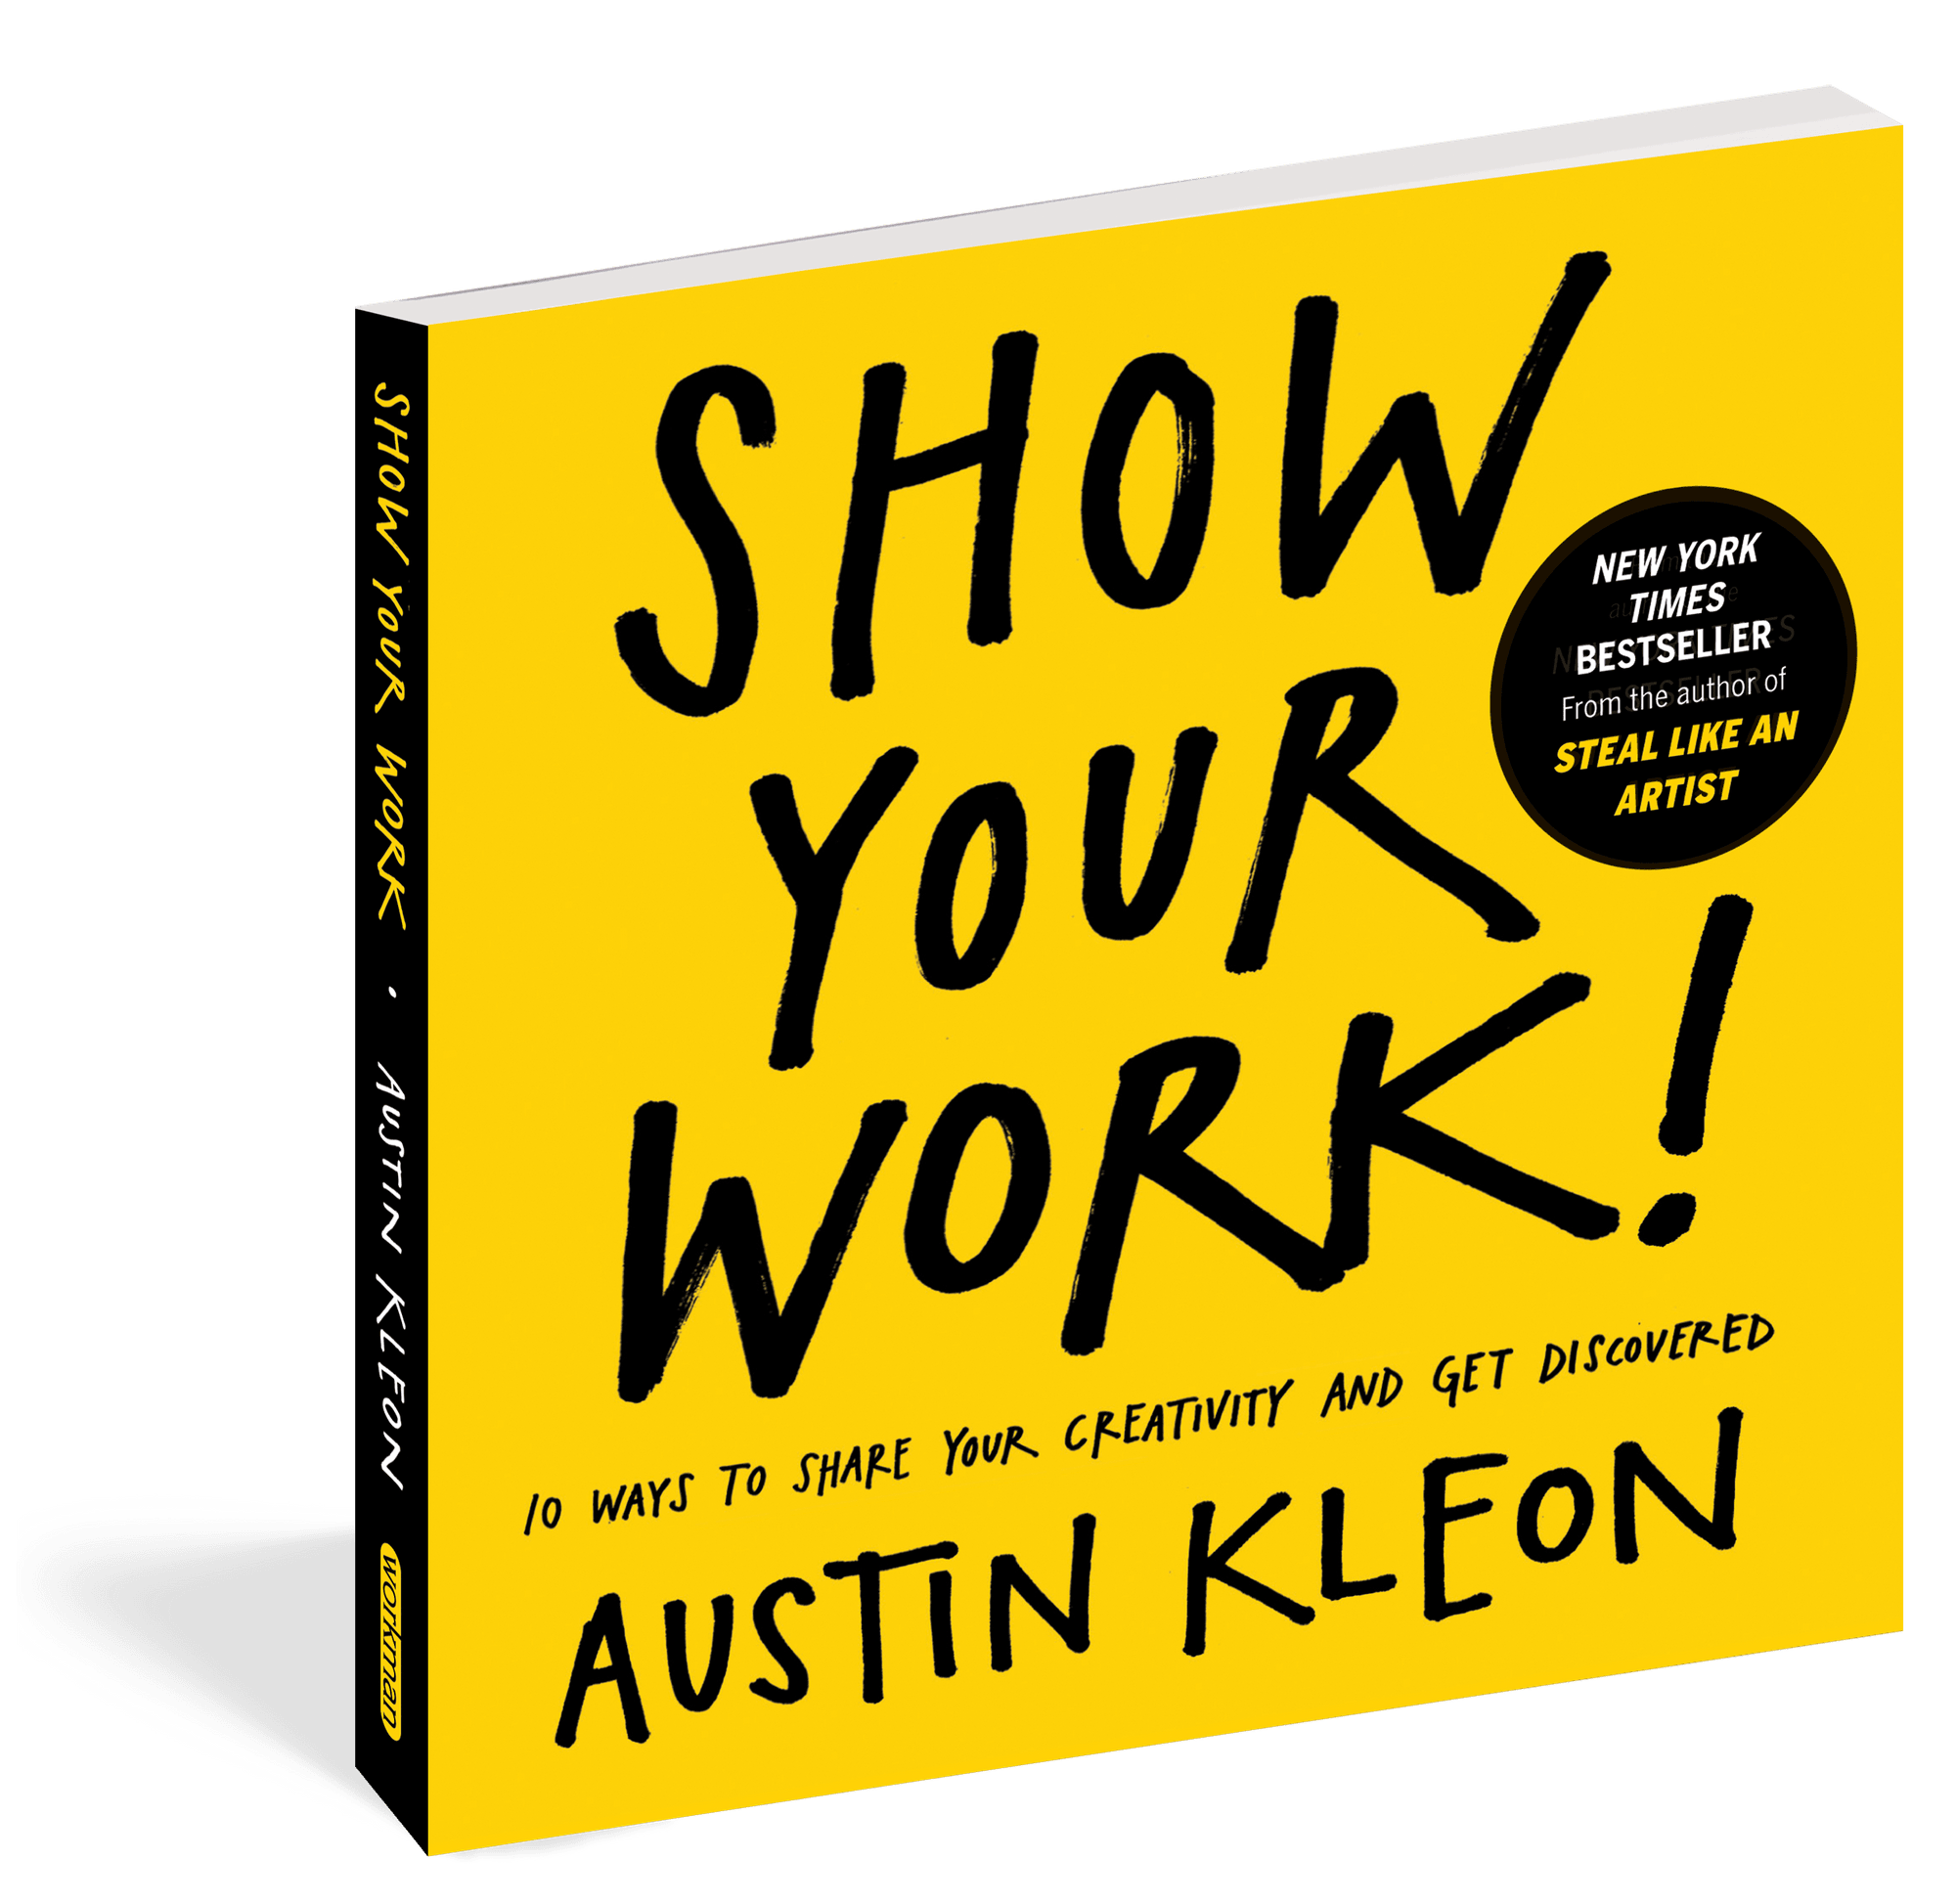 The cover of Show Your Work!